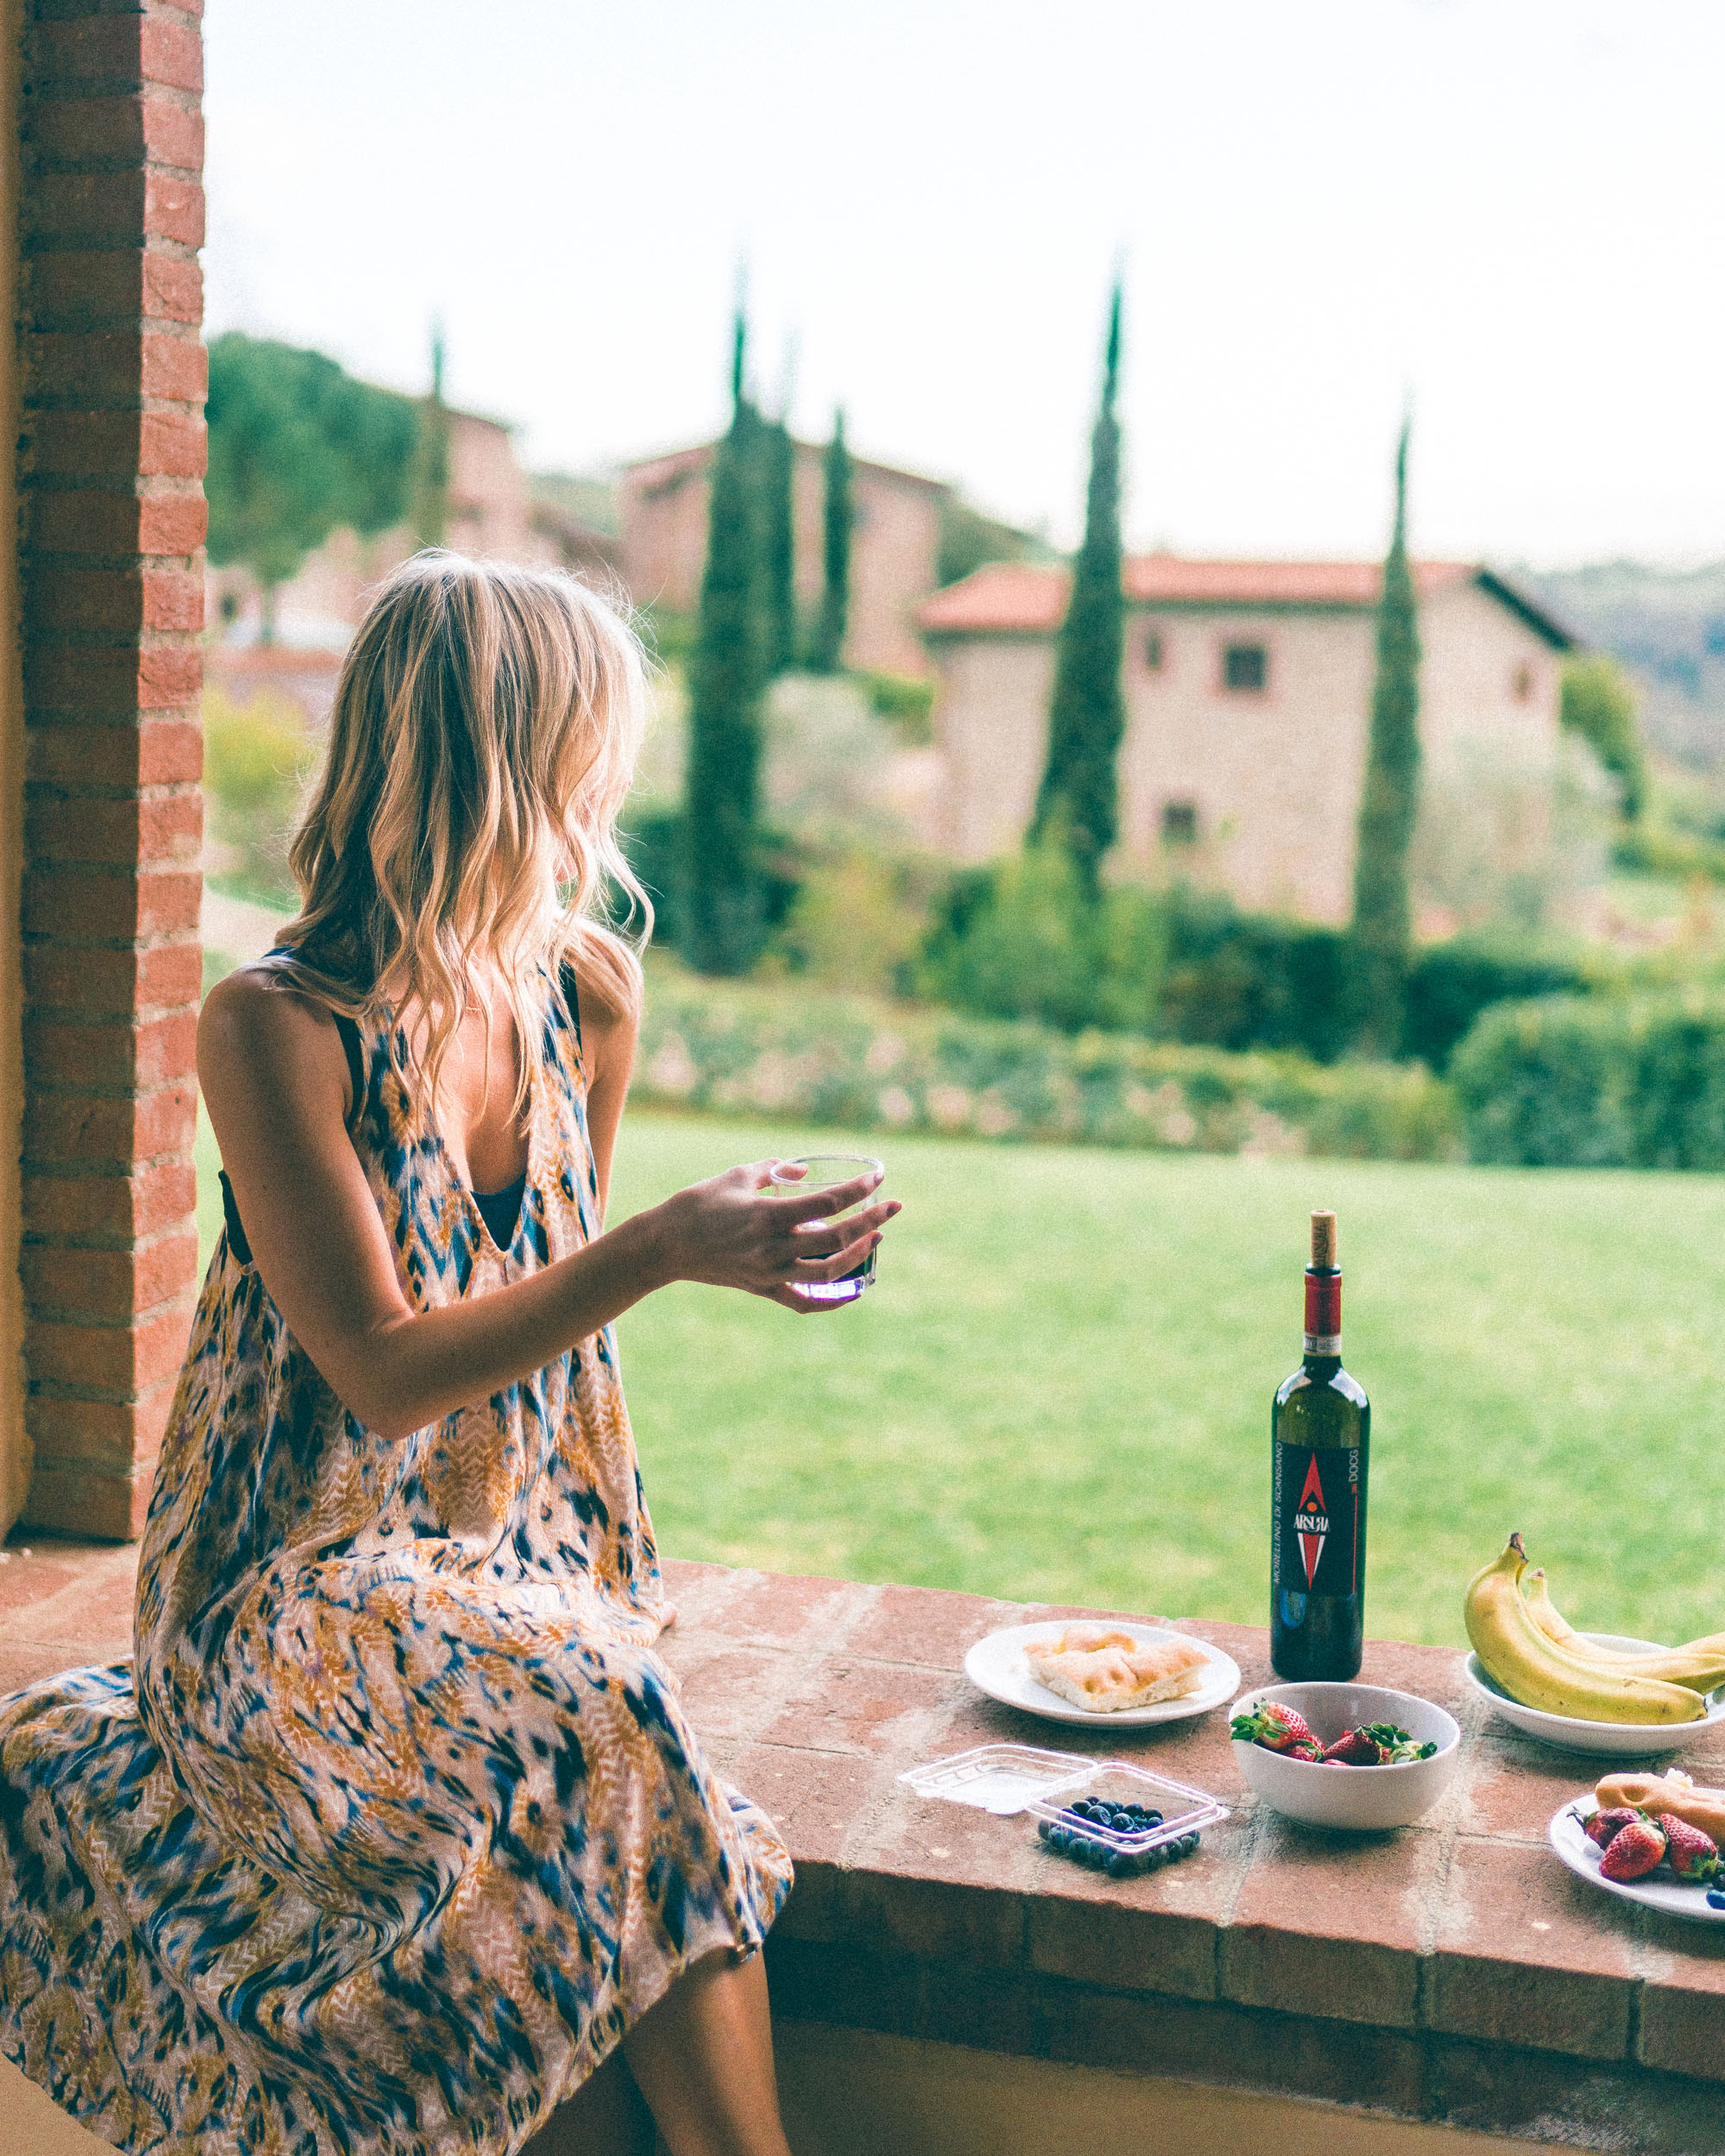 Wine tasting at our tuscan villa in southern Tuscany, Italy